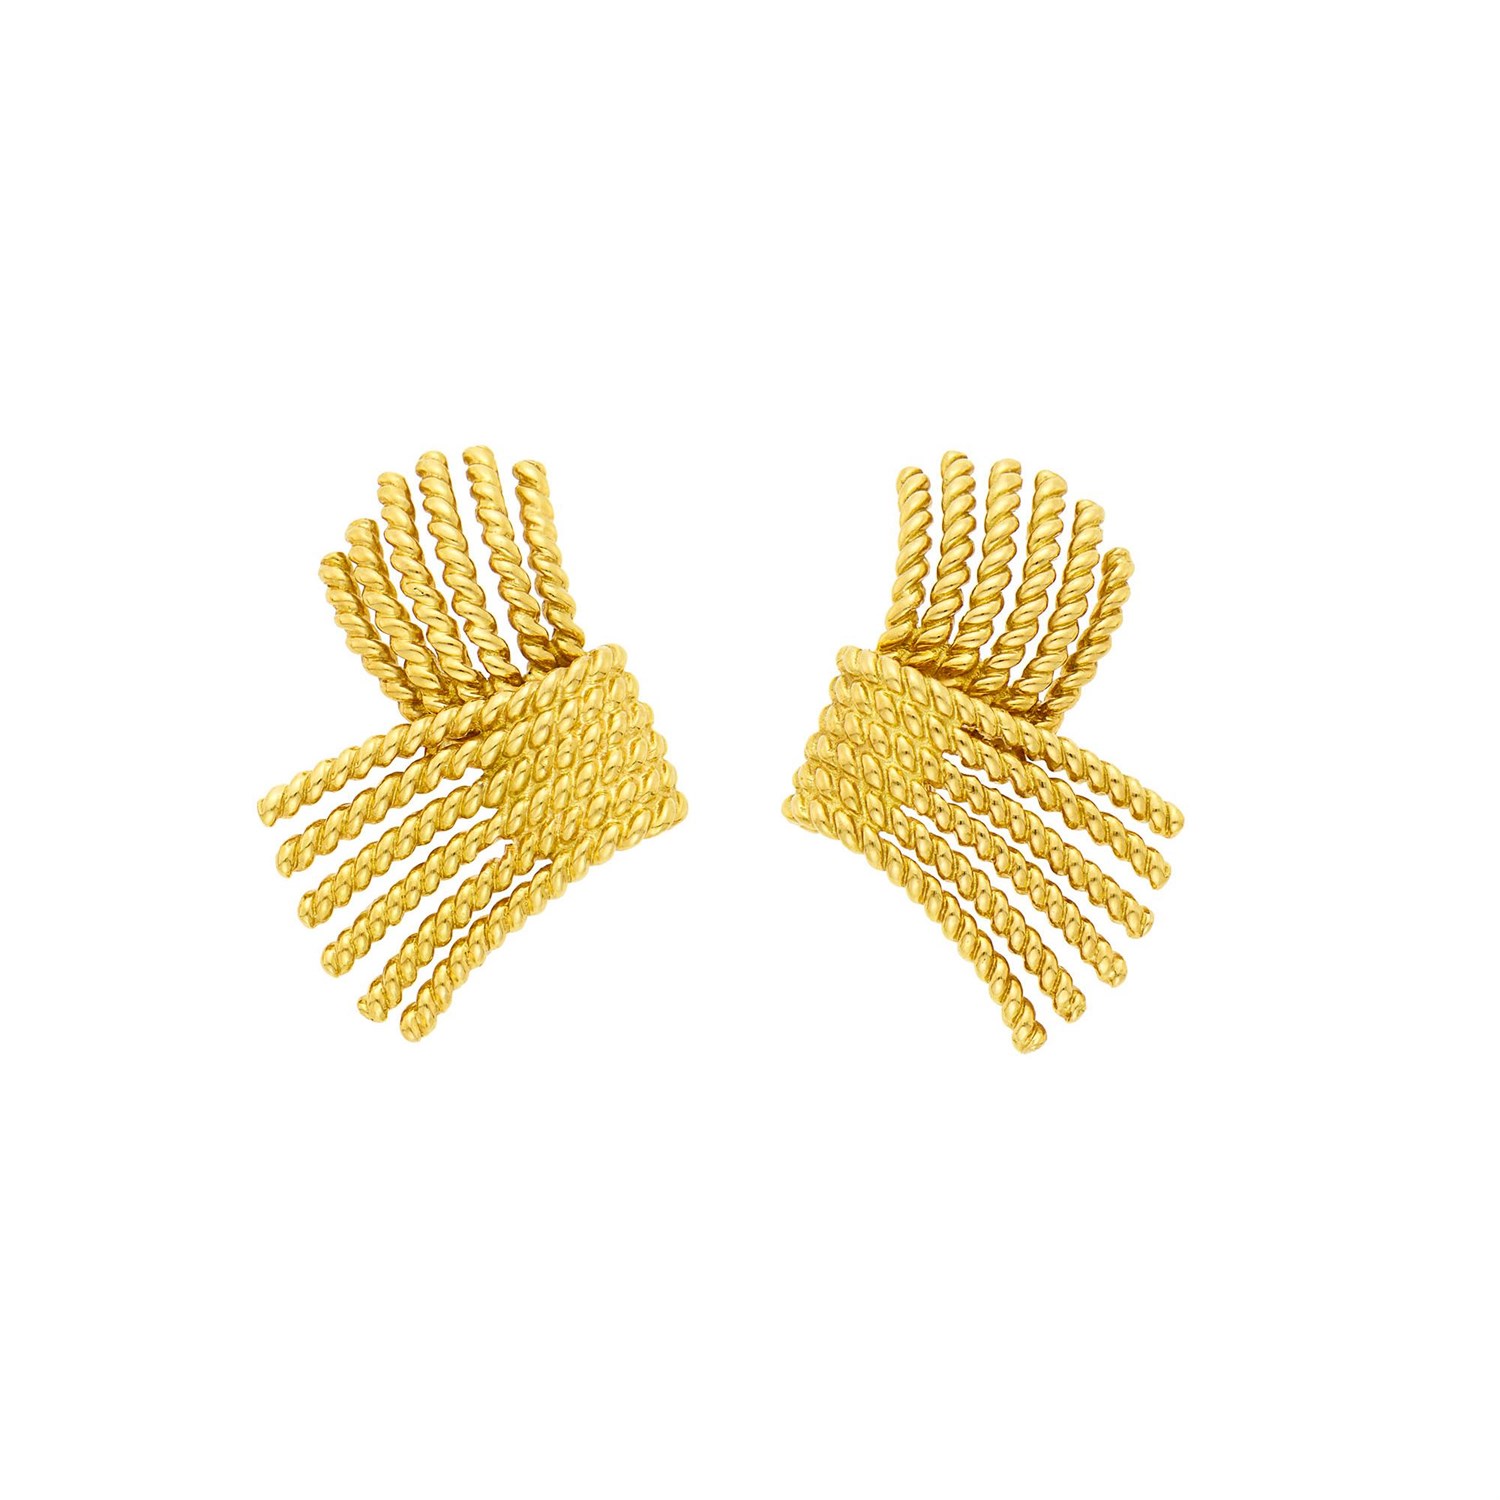 Lot 56 - Tiffany & Co., Schlumberger Pair of Gold 'V Rope' Earclips